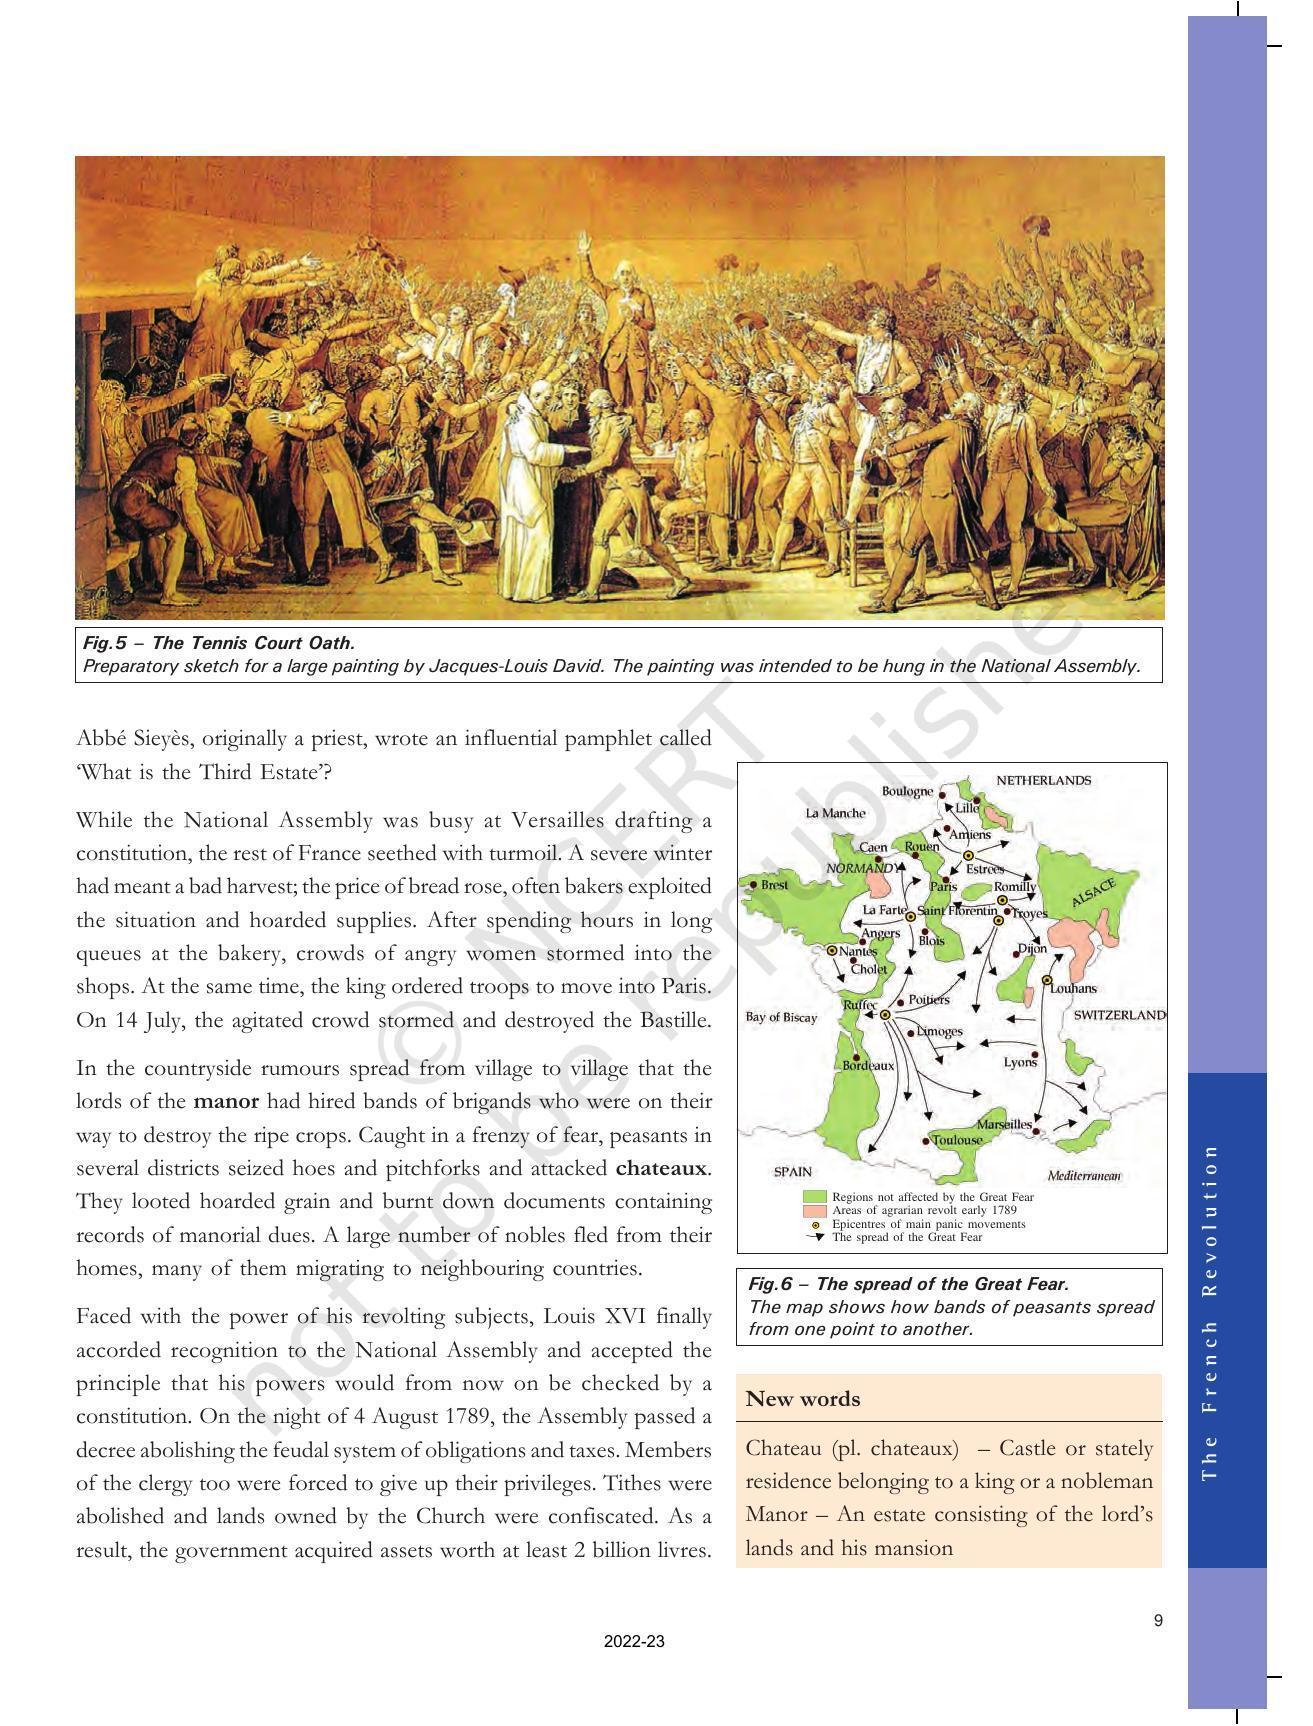 NCERT Book for Class 9 History Chapter 1 The French Revolution - Page 9